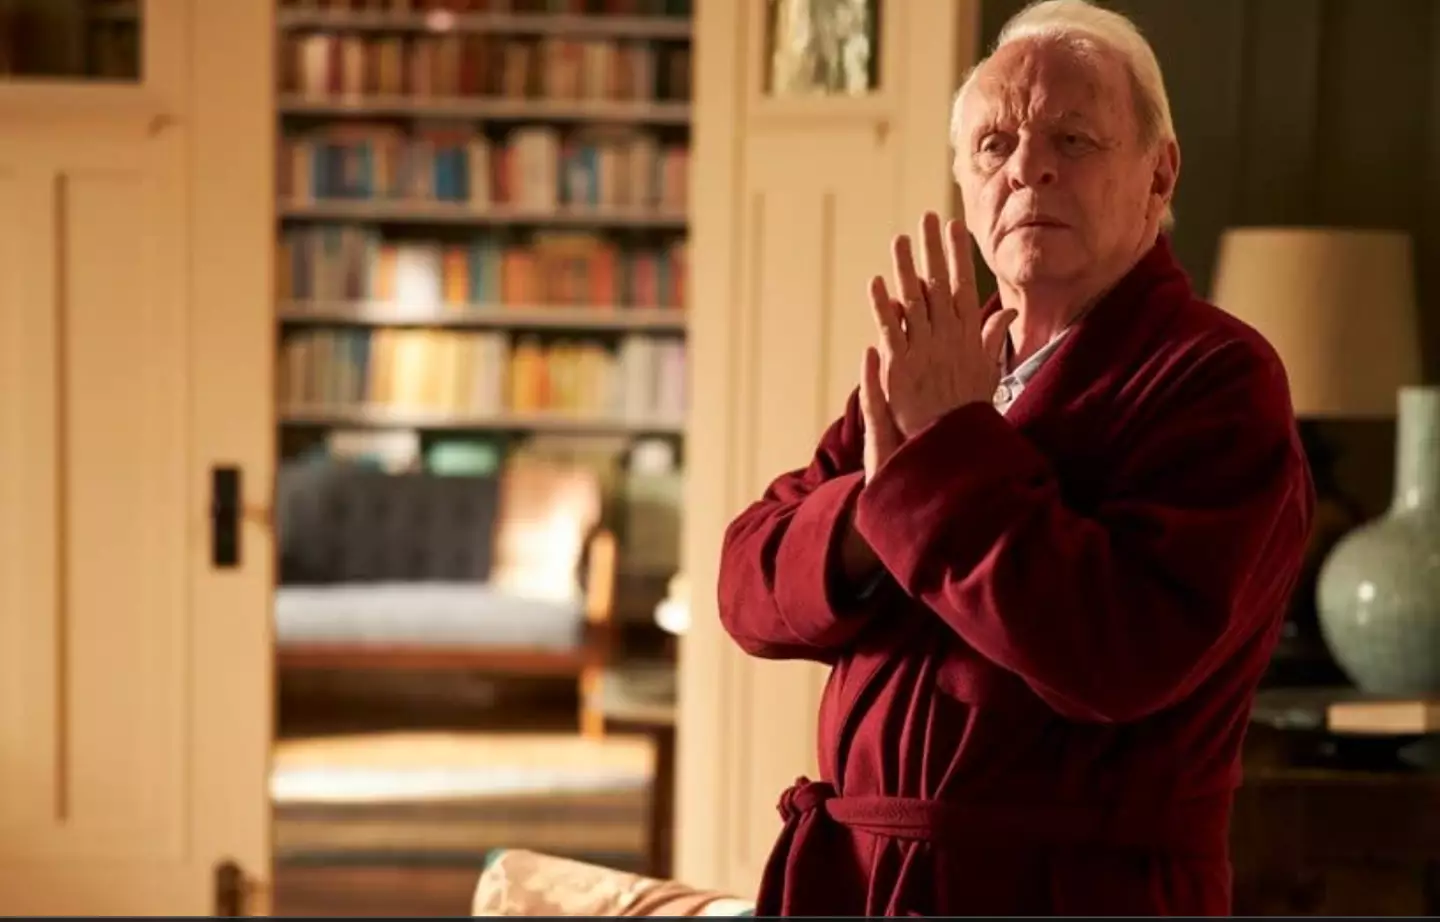 Anthony Hopkins plays the main role of a man in his eighties who is diagnosed with dementia.